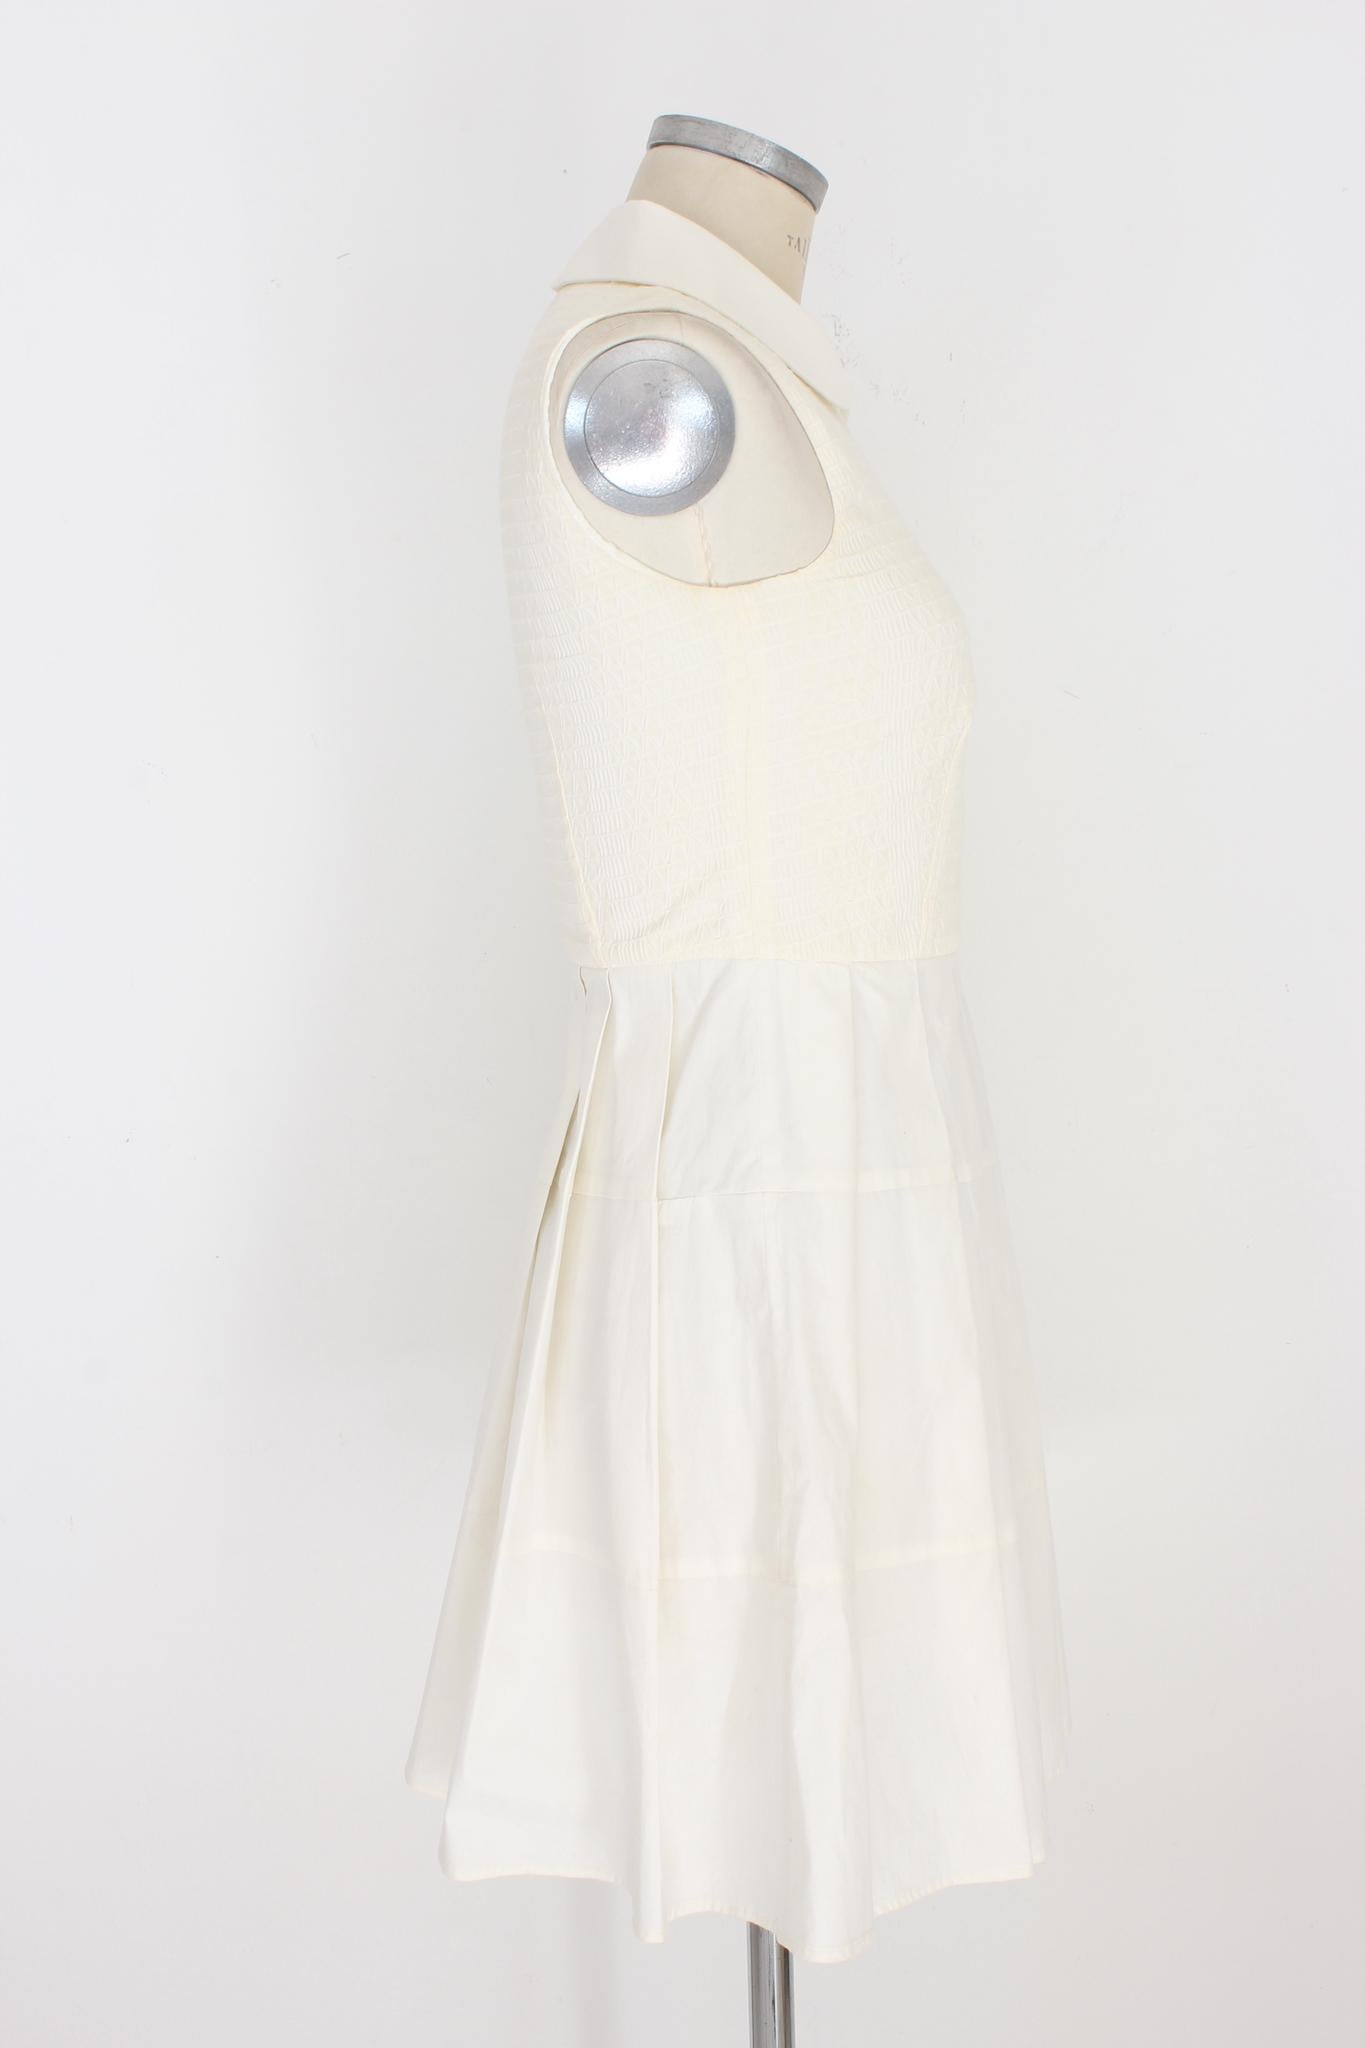 Valentino White Cotton Sheath Dress 2000s In Good Condition For Sale In Brindisi, Bt